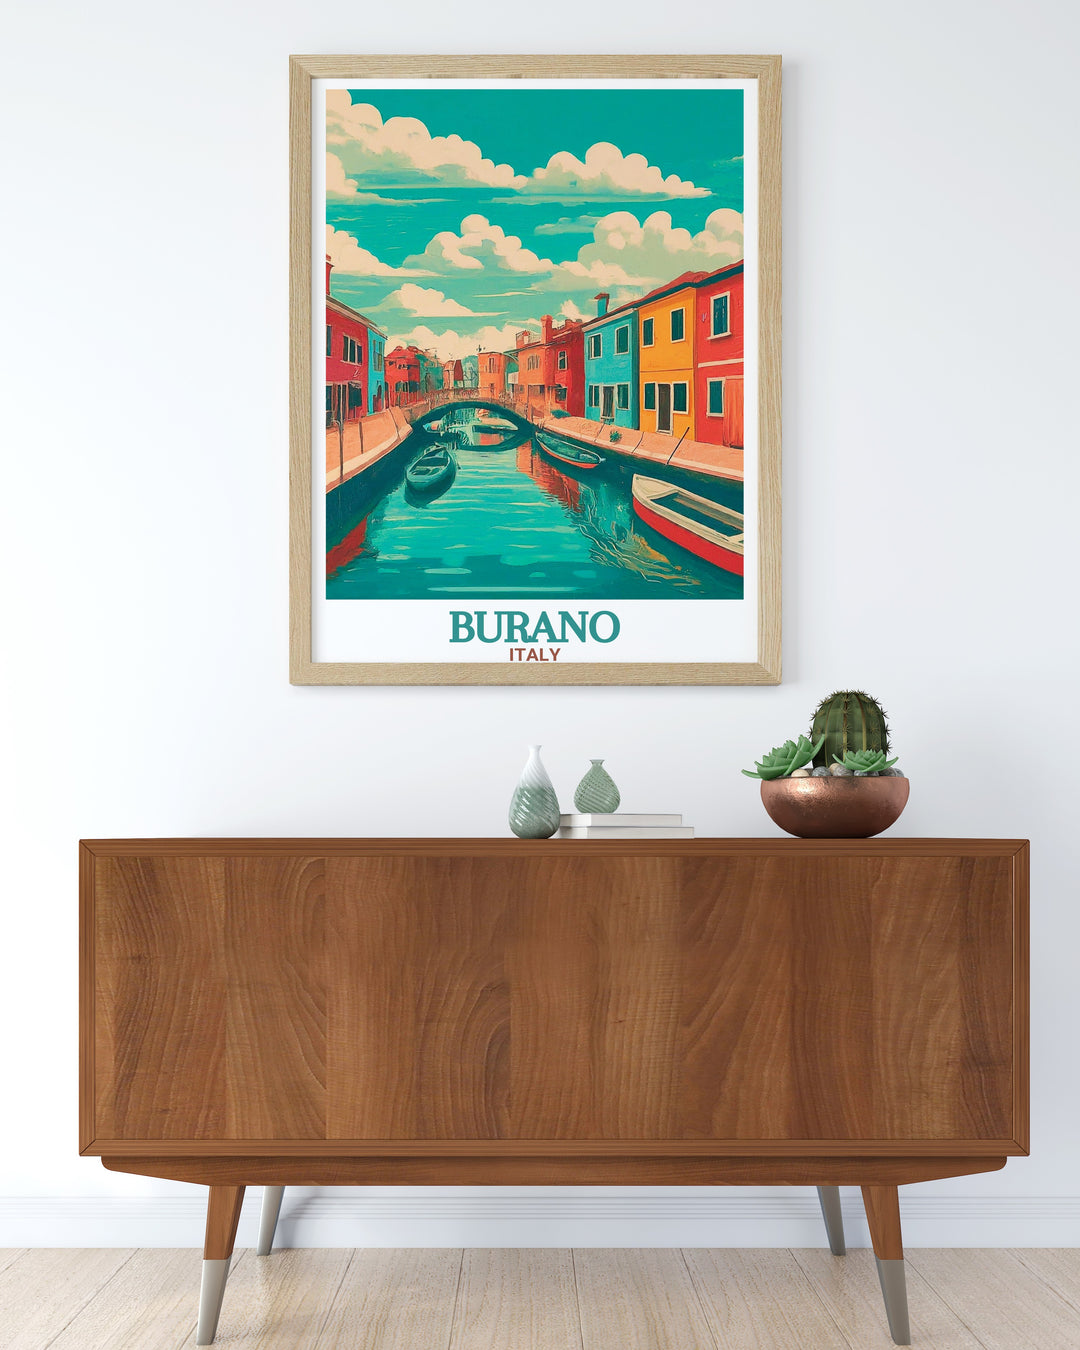 Stunning Burano city print featuring the iconic Canals and Bridges of this picturesque Italian island. Bright colors and serene waterways make this artwork a perfect gift for anyone who loves travel and beautiful cityscapes.